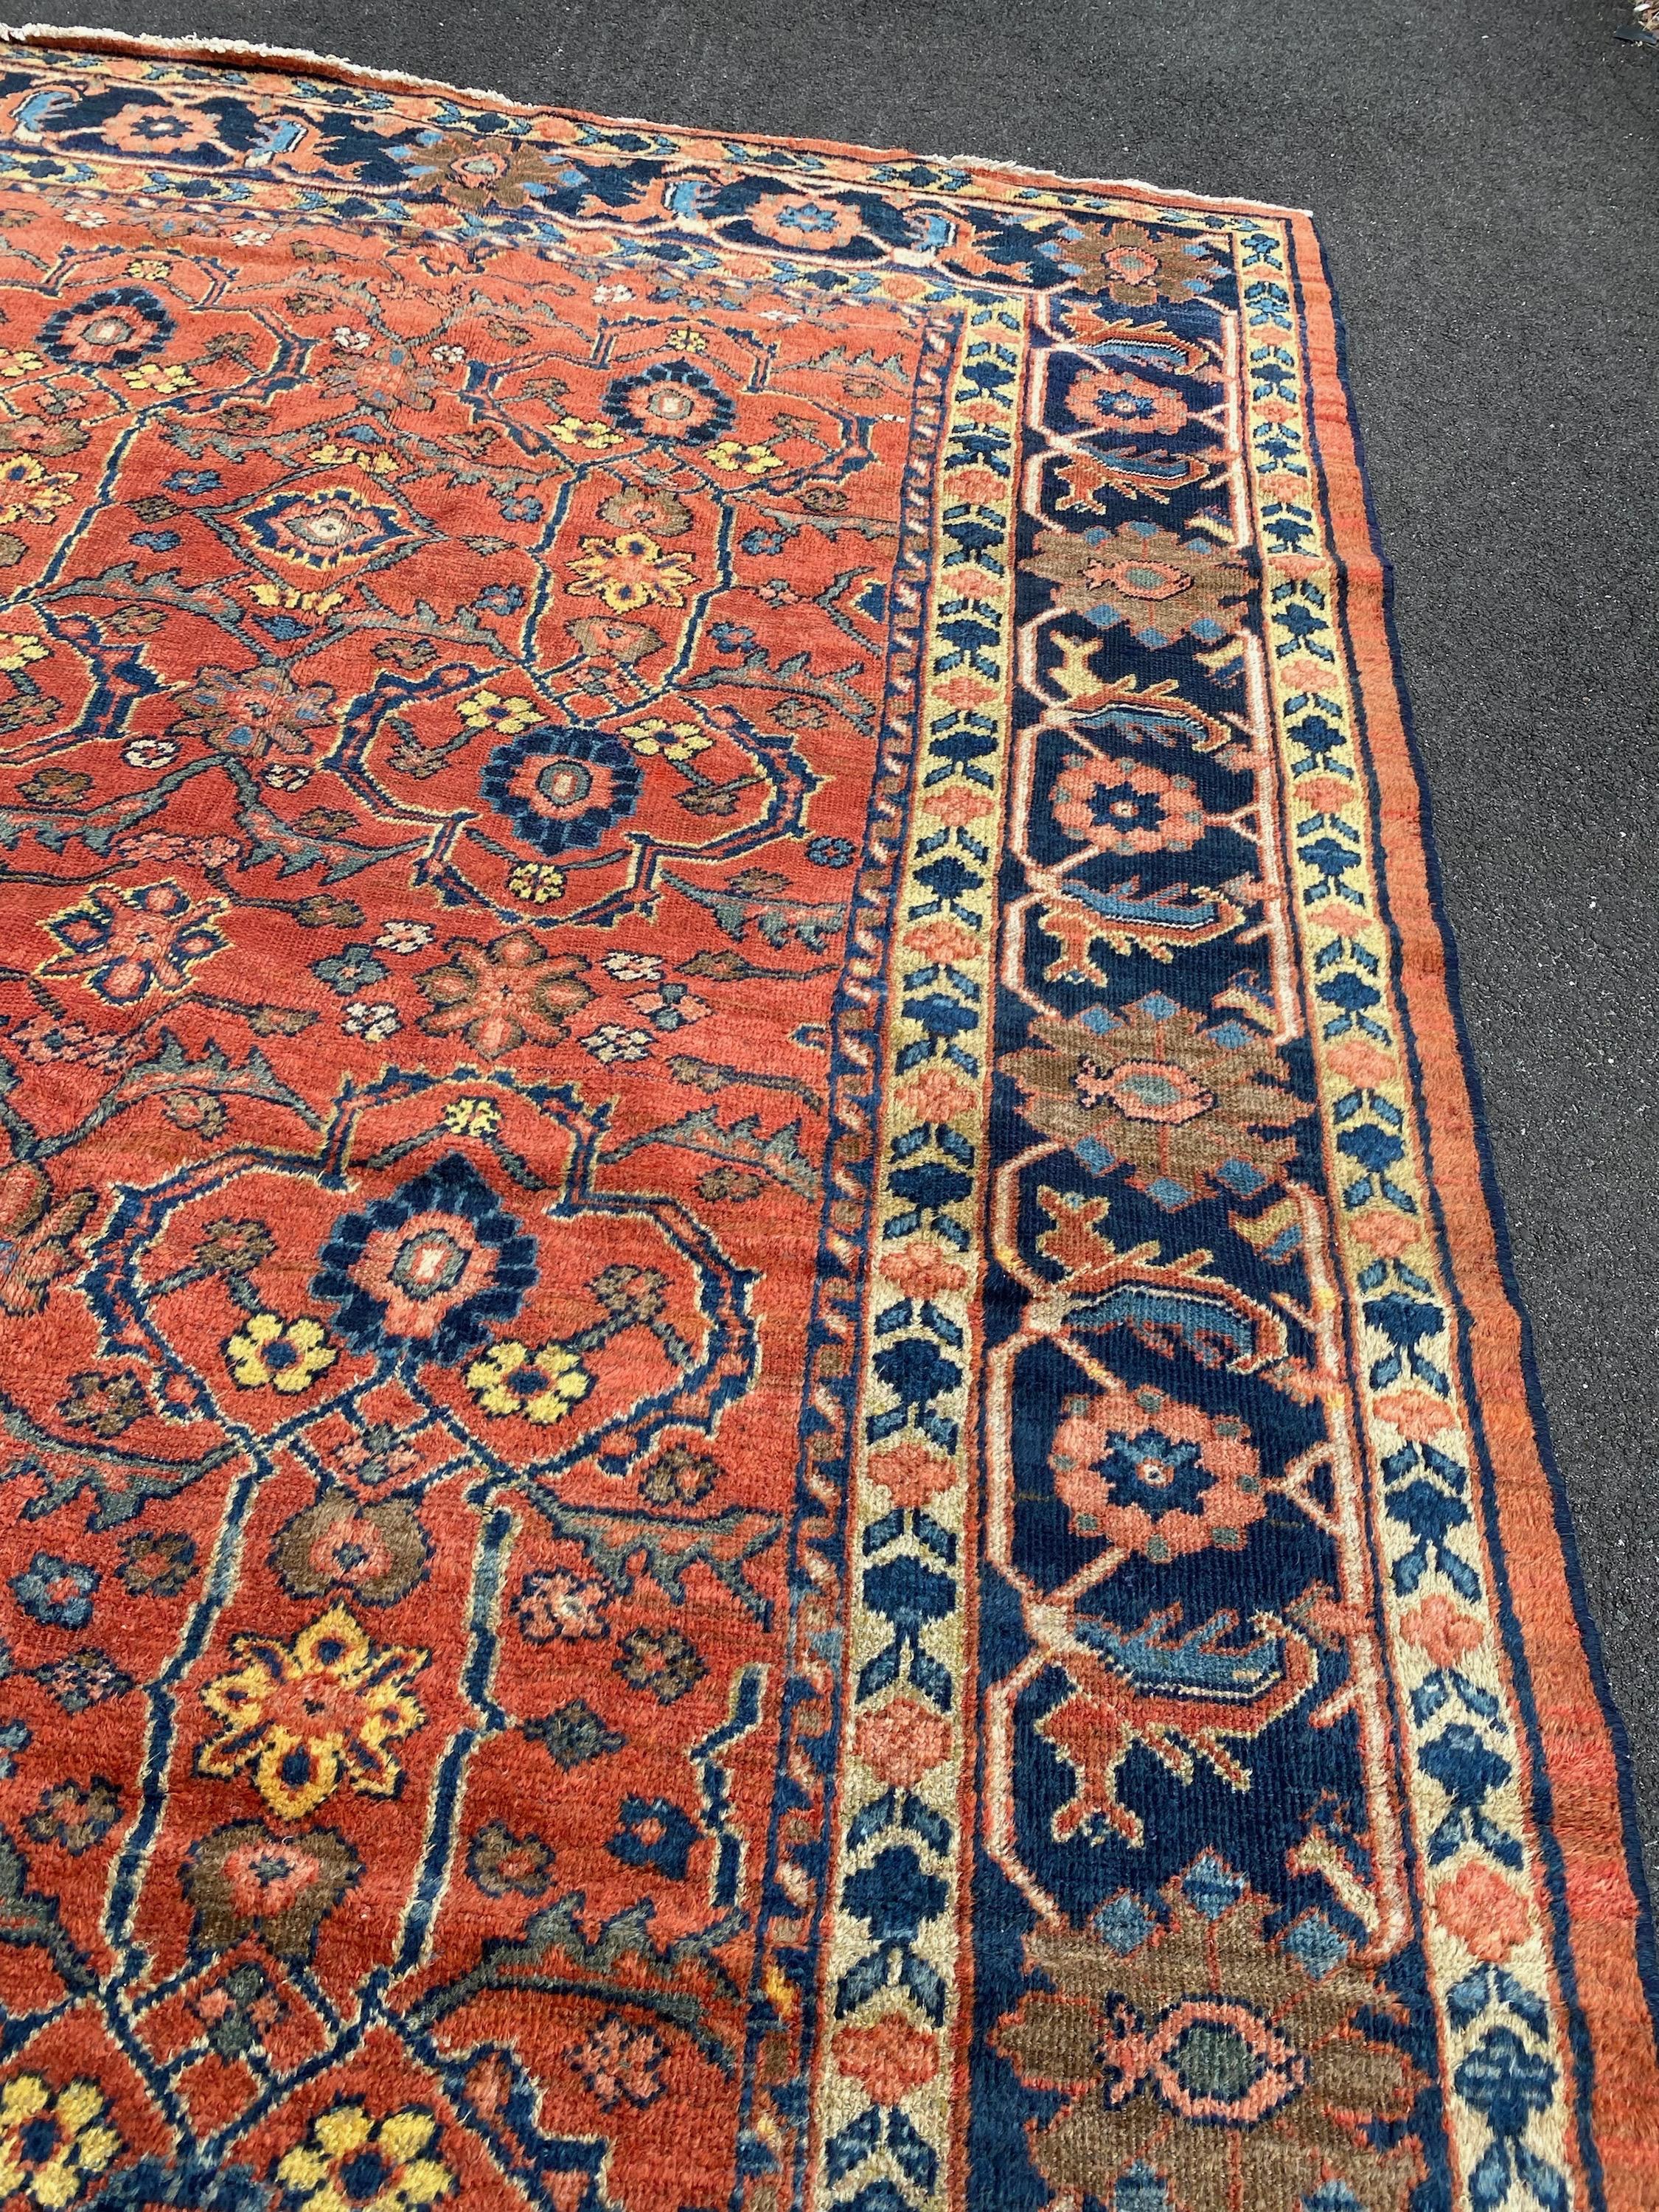 Hand-Knotted Antique Persian Rust and Navy Blue Mahal Ziegler Carpet